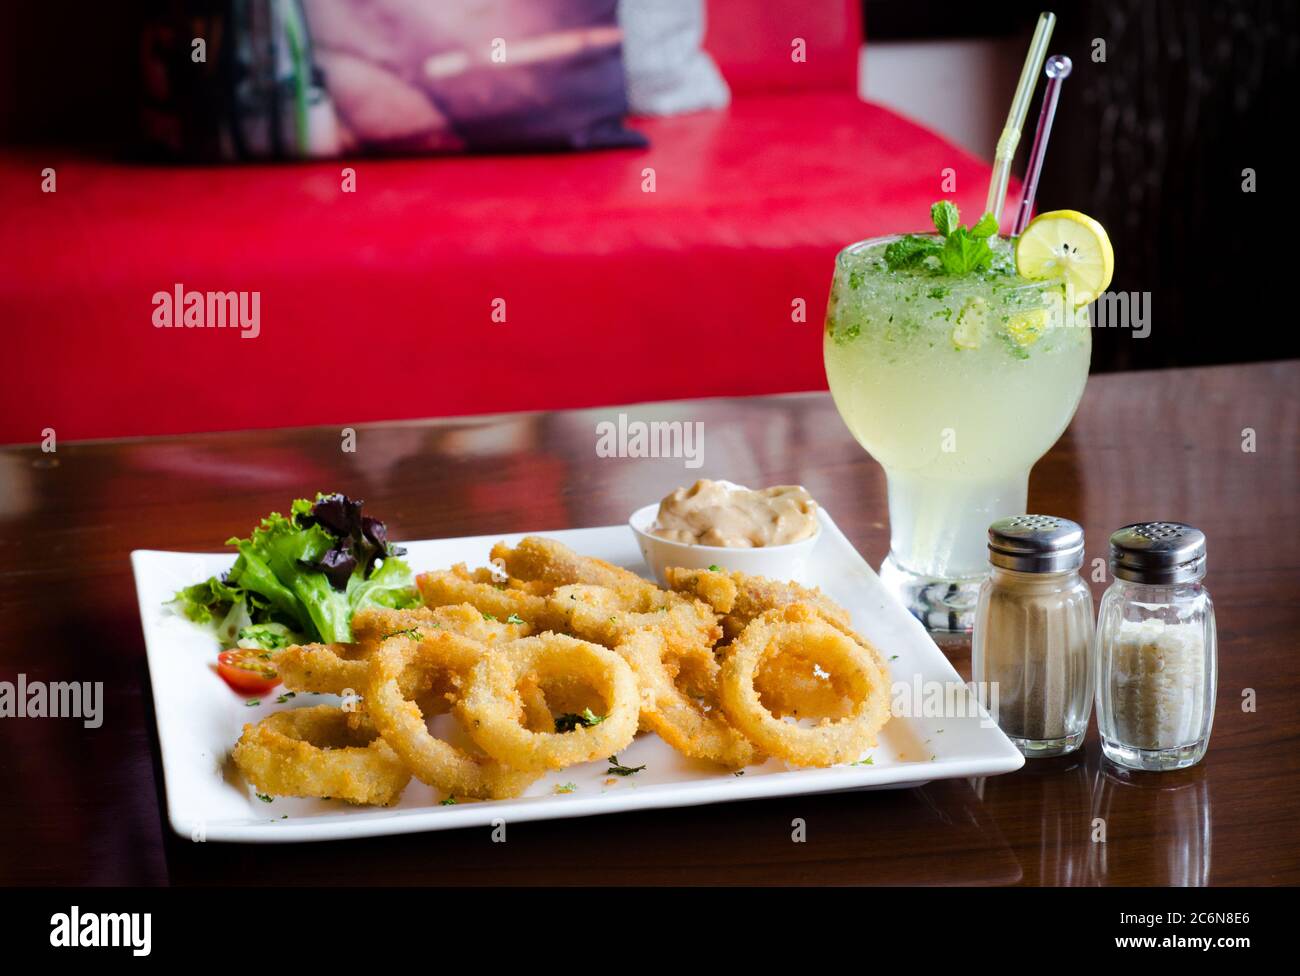 Tasty Onion rings with great presentation Stock Photo